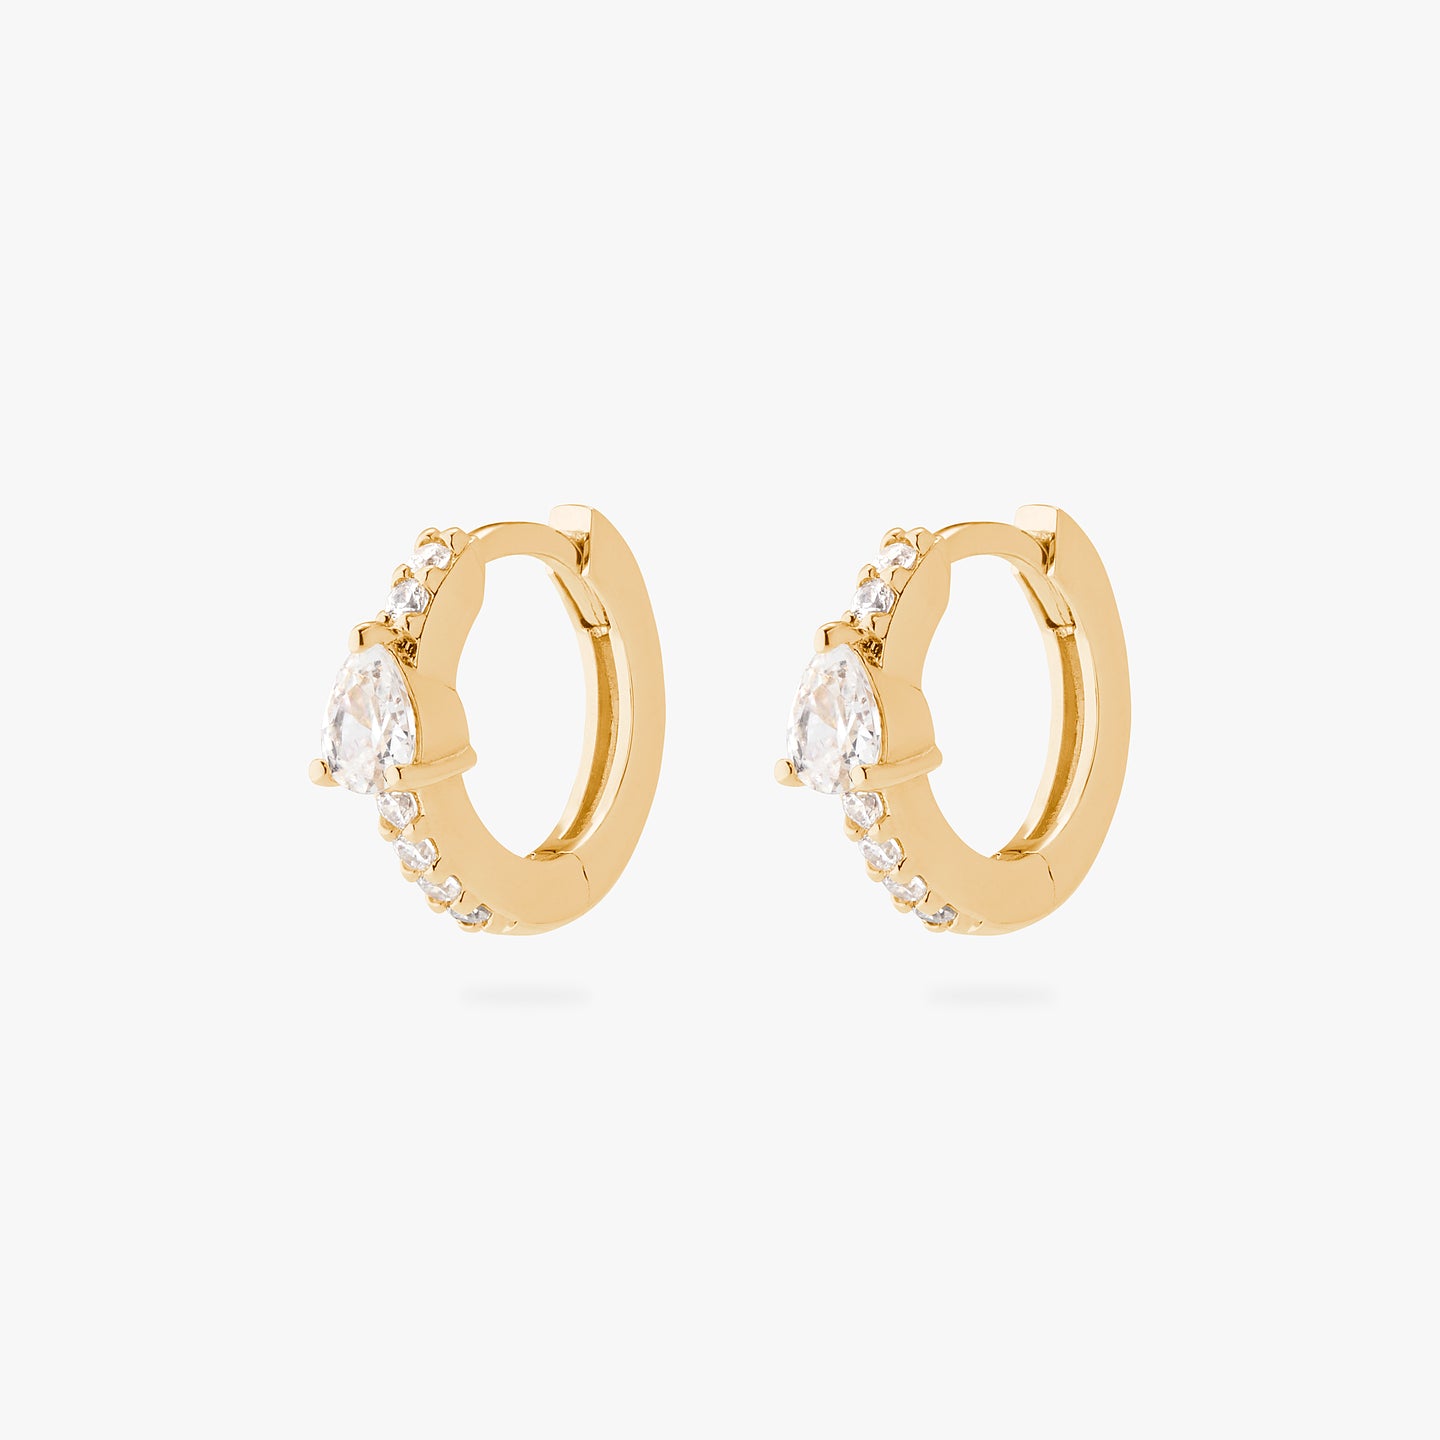 An image of a pair of gold/clear mini pave huggies with a clear pear shaped CZ accent stone. [pair] color:null|gold/clear